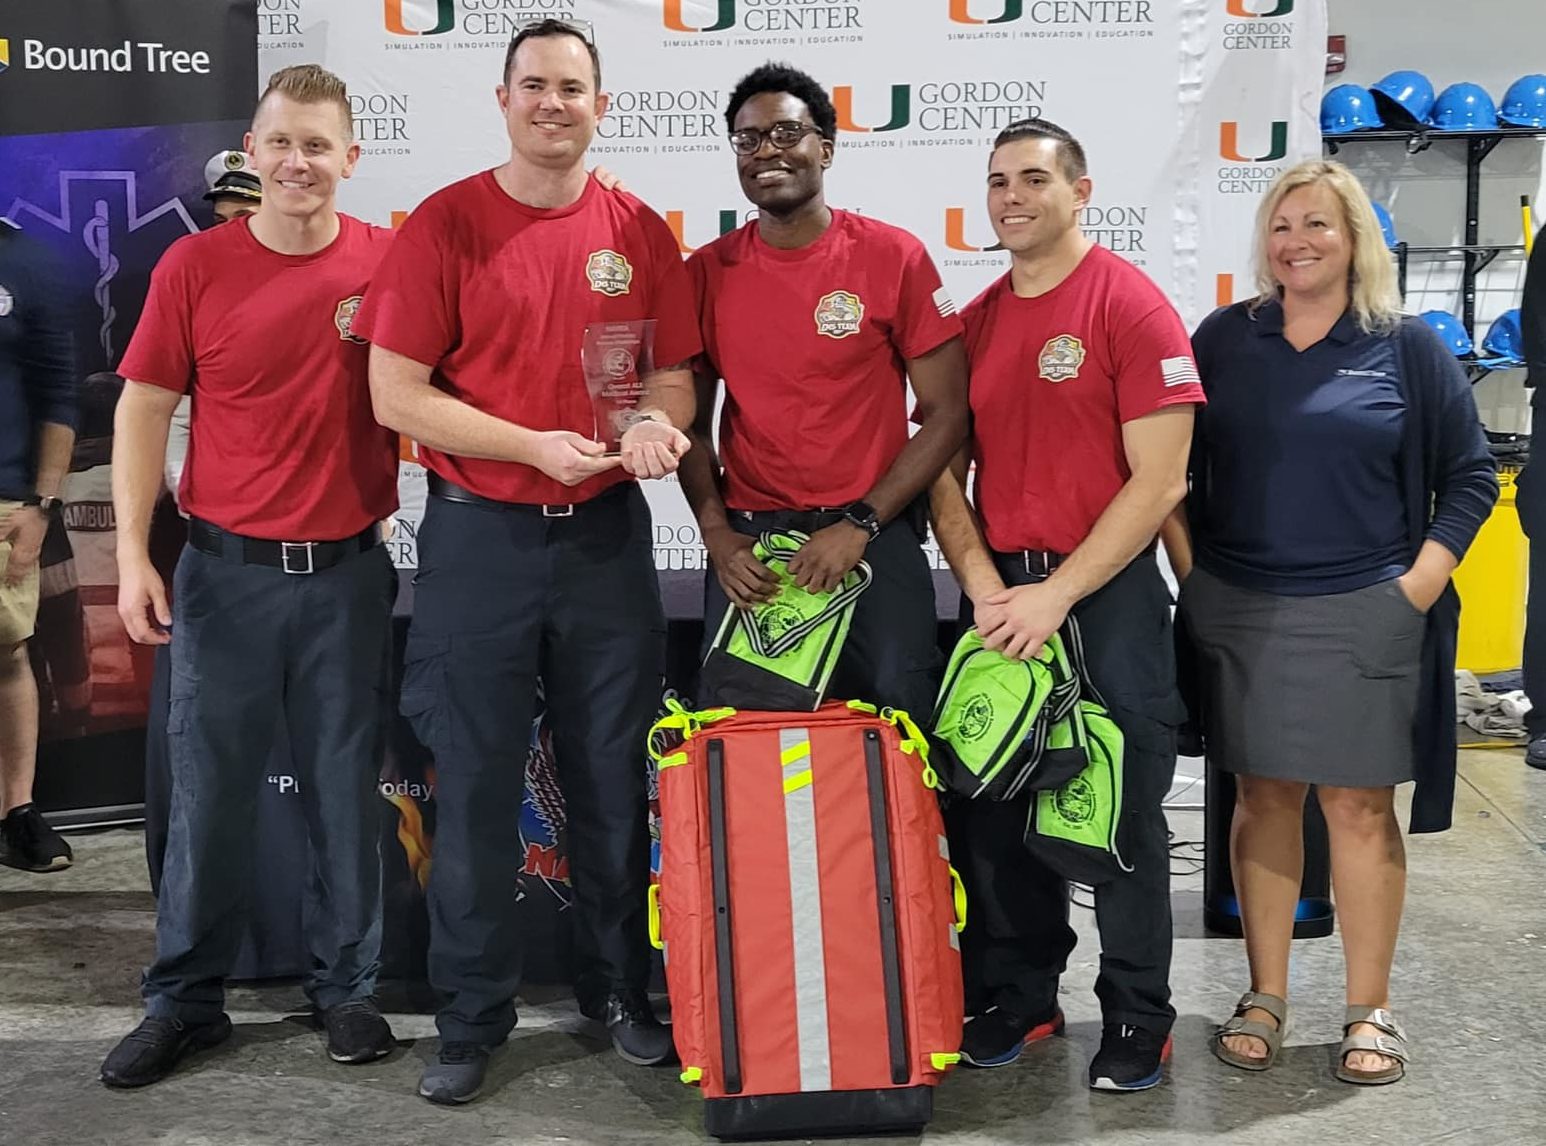 Tamarac Fire Rescue Wins First Place in North American Vehicle Rescue Challenge